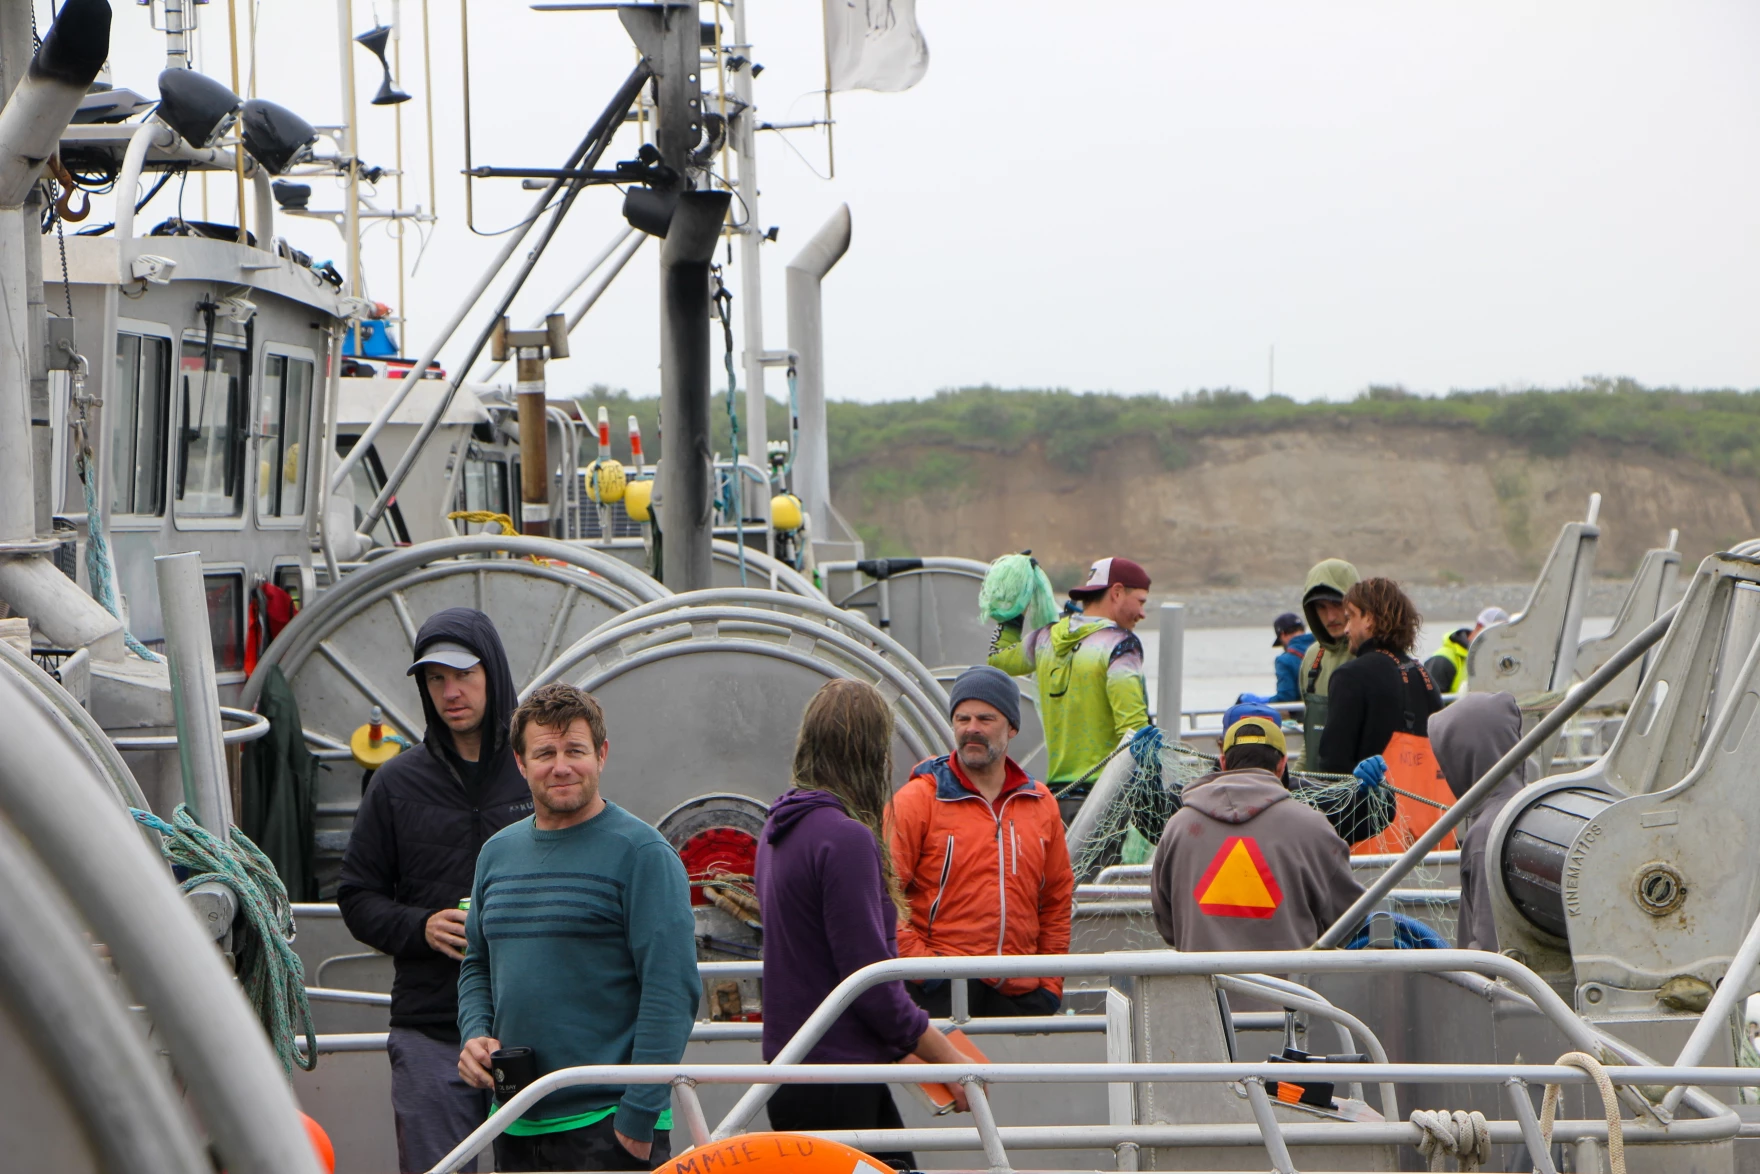 Bristol Bay fishermen protest low base price, lack of transparency from  processors